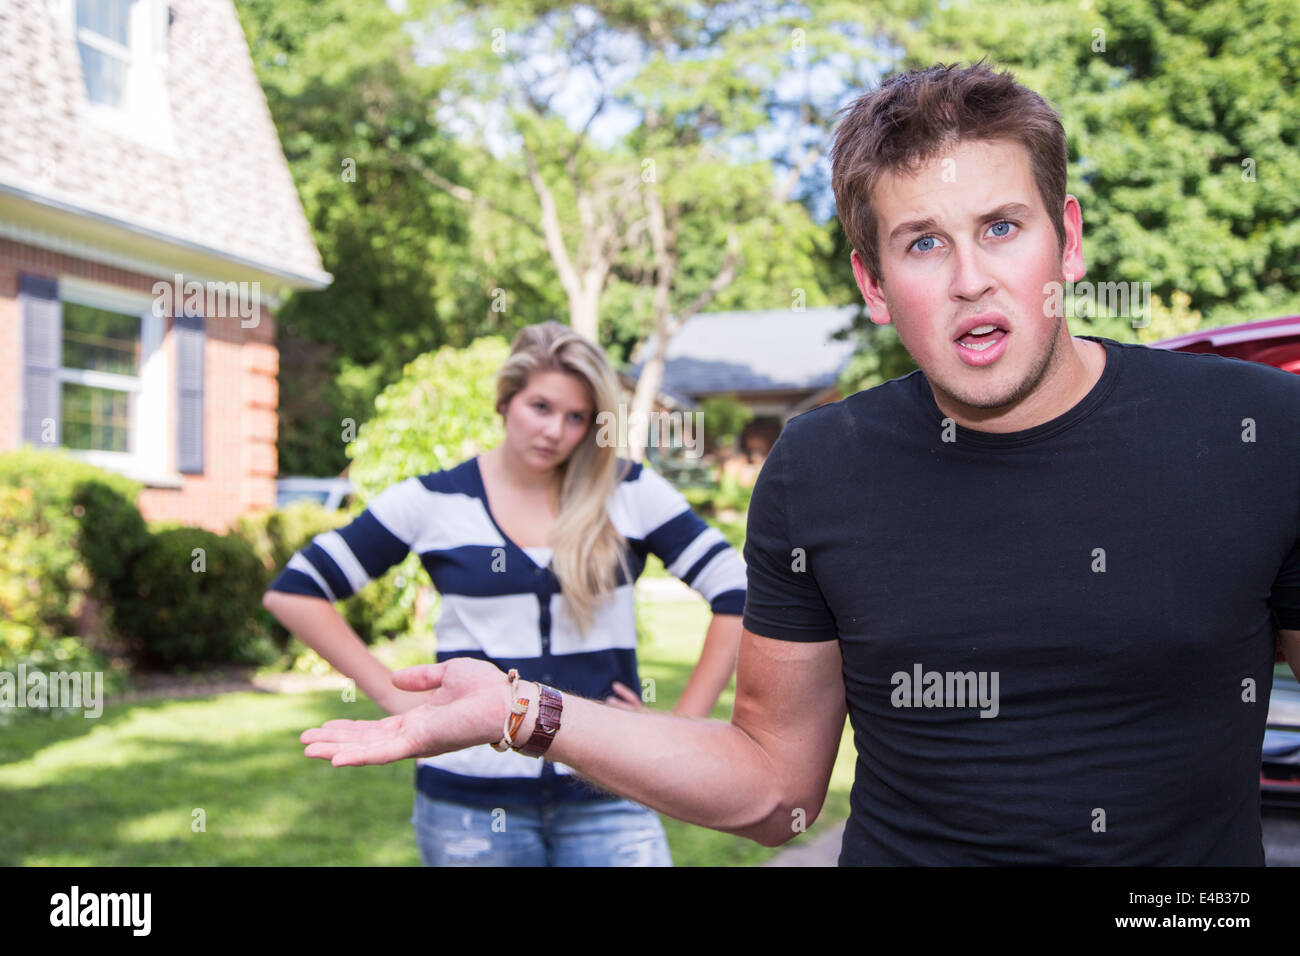 A young man shows frustration in an argument with his girlfriend Stock Photo